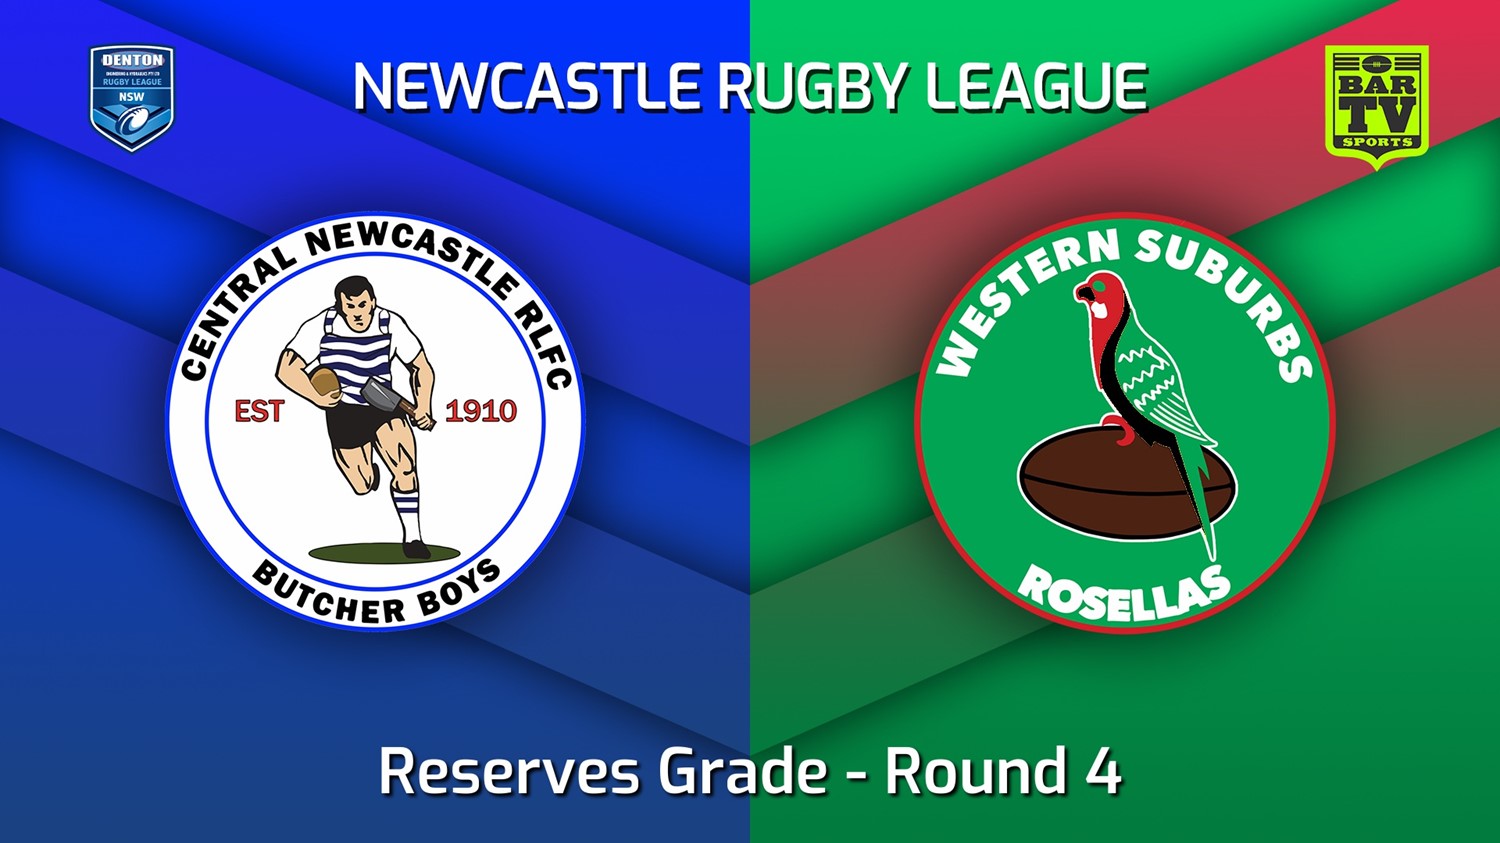 220416-Newcastle Round 4 - Reserves Grade - Central Newcastle v Western Suburbs Rosellas Slate Image